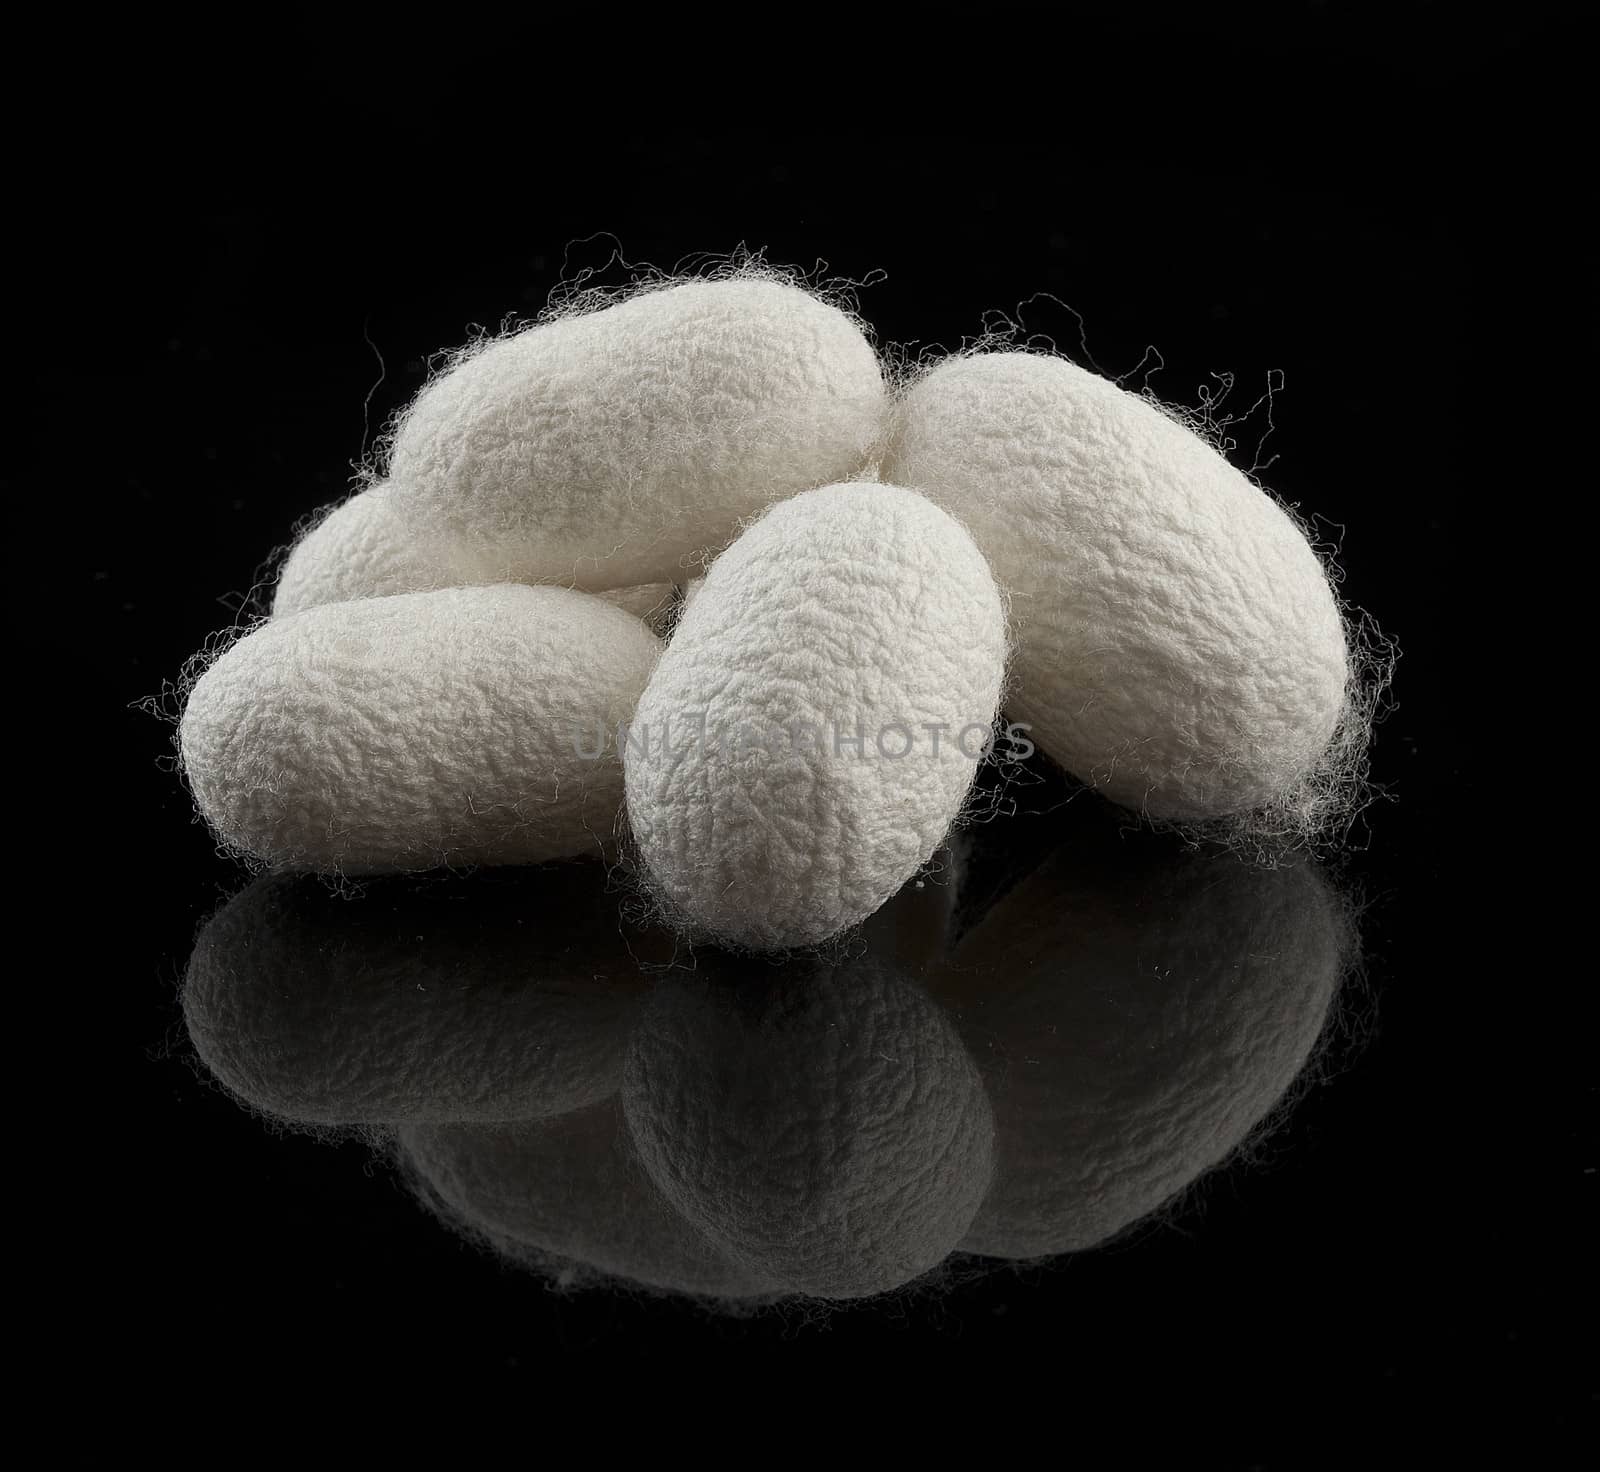 Some cocoons of the silkworm on the black background